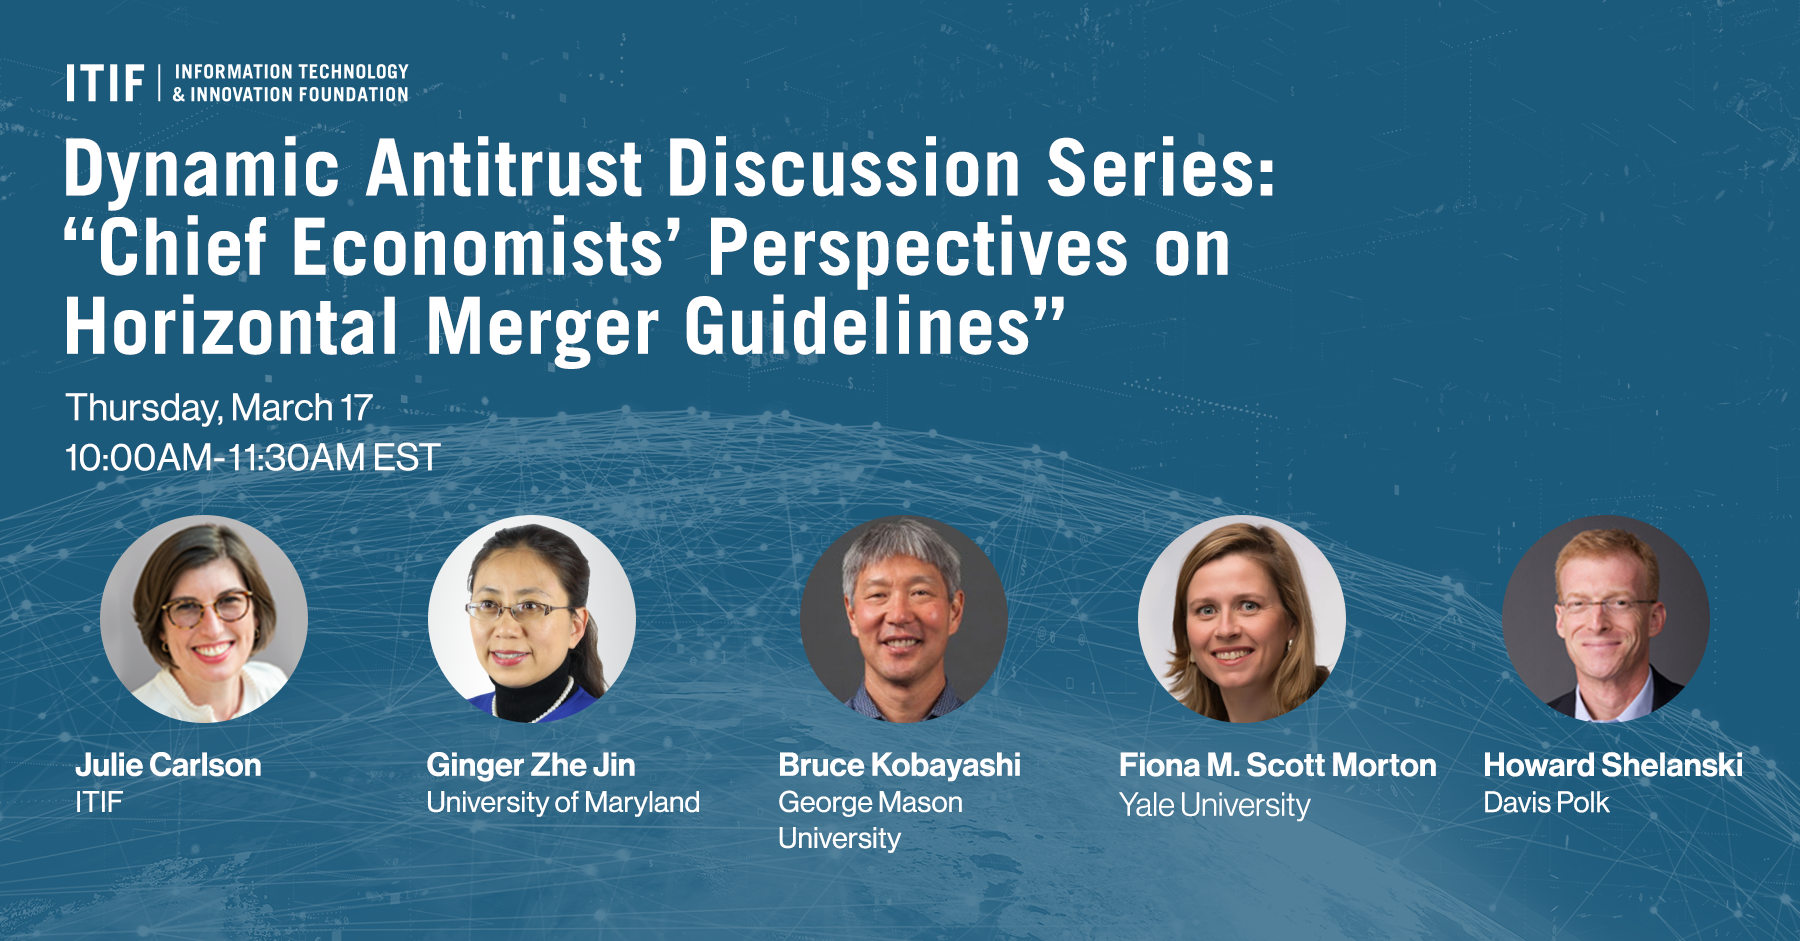 Dynamic Antitrust Discussion Series: “Chief Economists’ Perspectives on Horizontal Merger Guidelines”